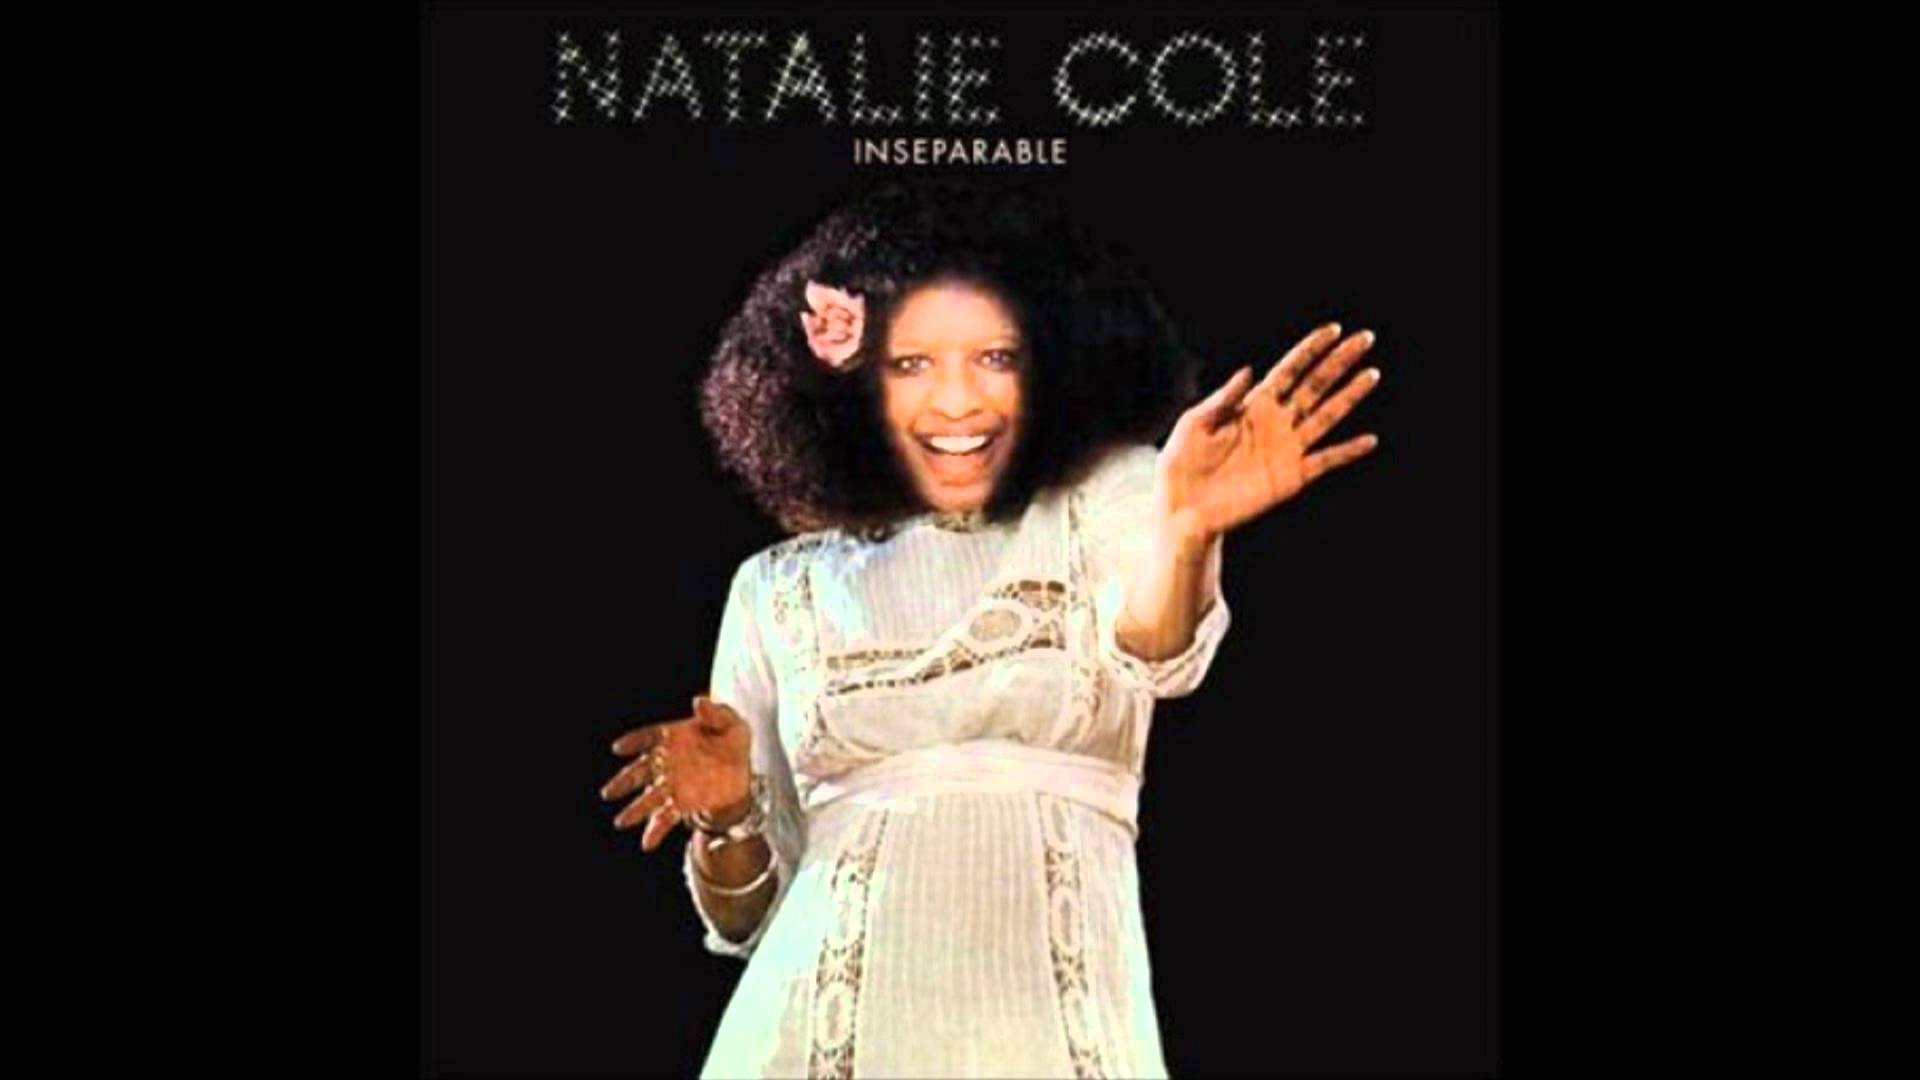 Natalie Cole - This Will Be